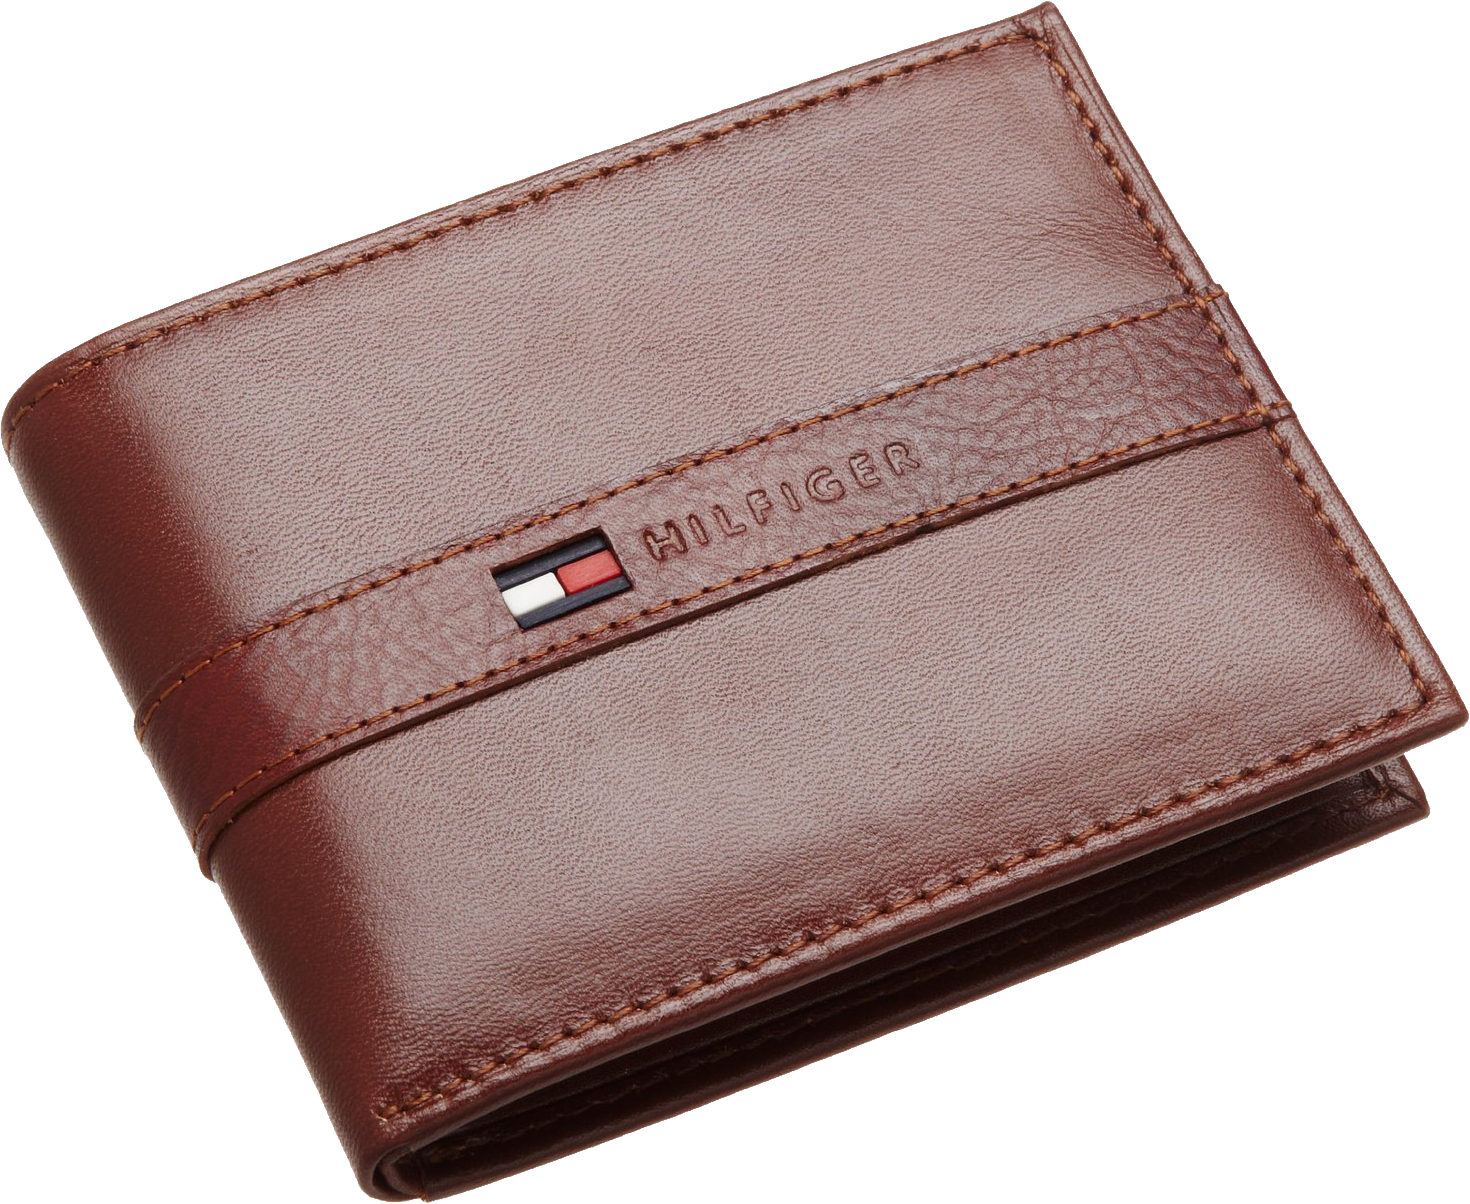 Brown Gents Purse PNG Image Background